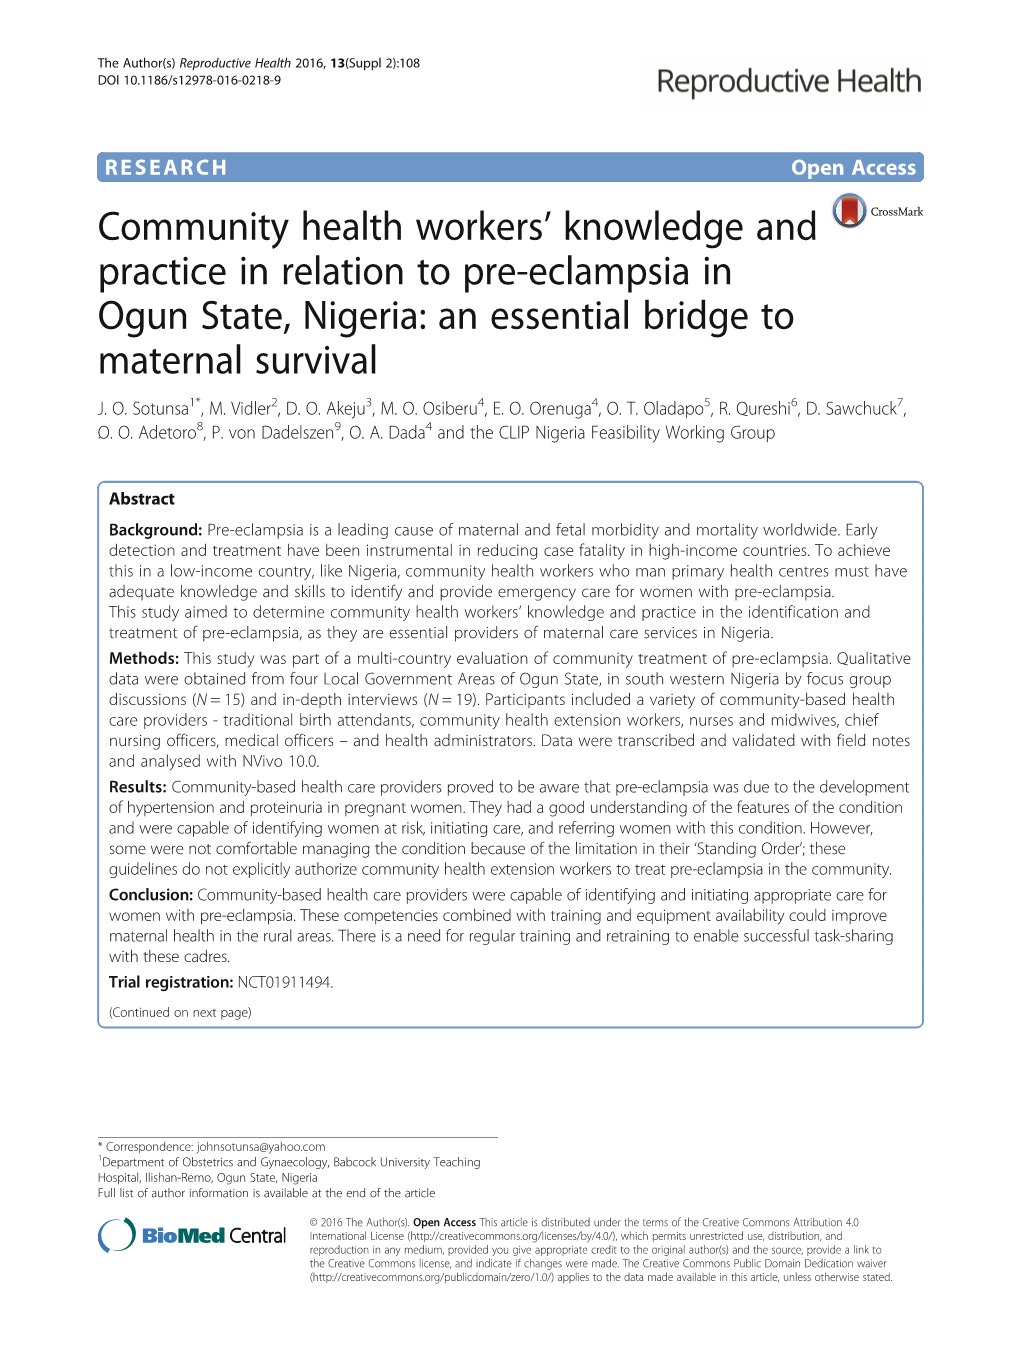 Community Health Workers' Knowledge and Practice in Relation